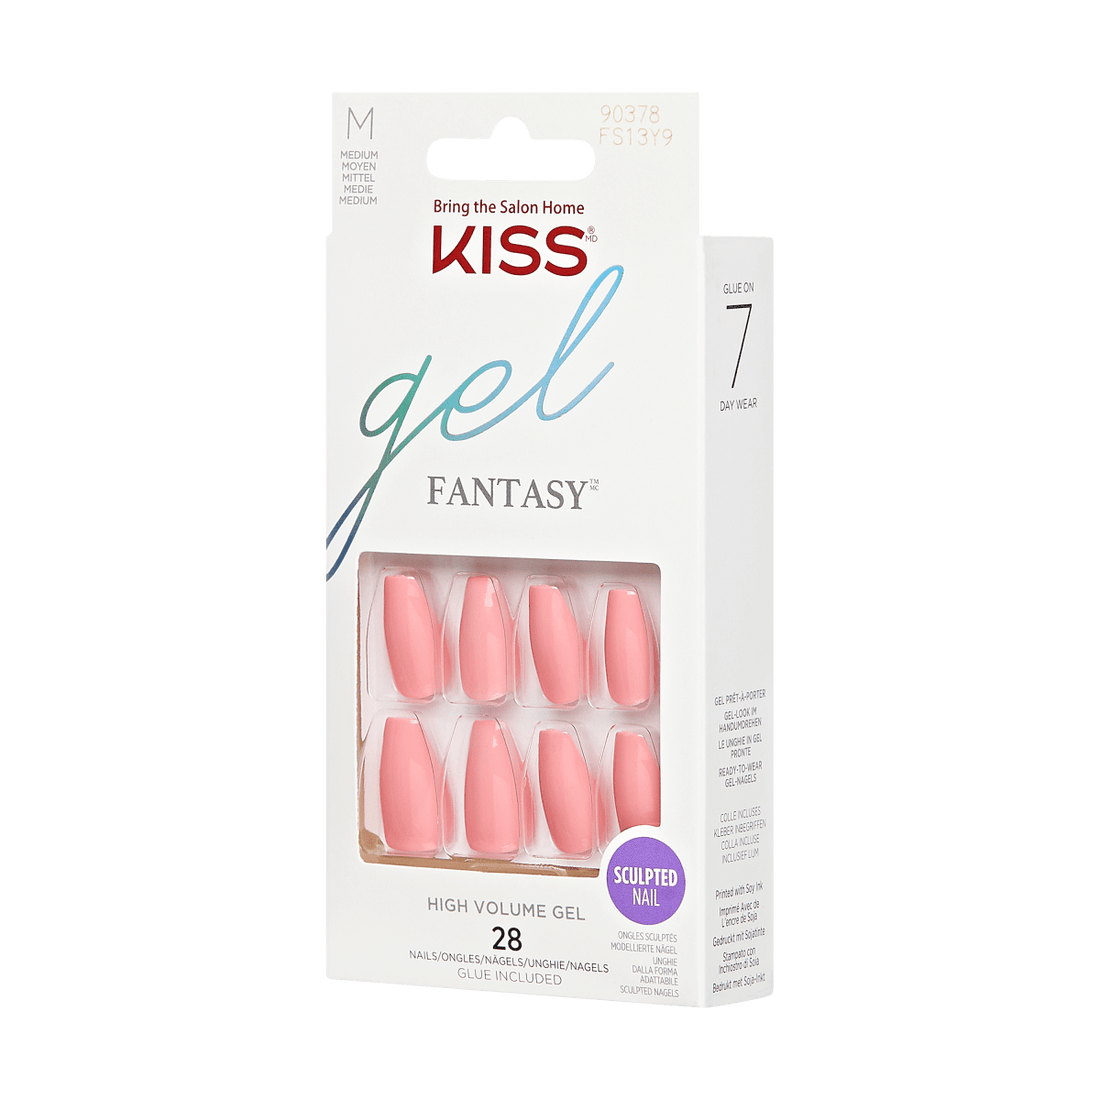 KISS Gel Fantasy, Press-On Nails, Like Candy, Pink, Med Coffin, 28ct